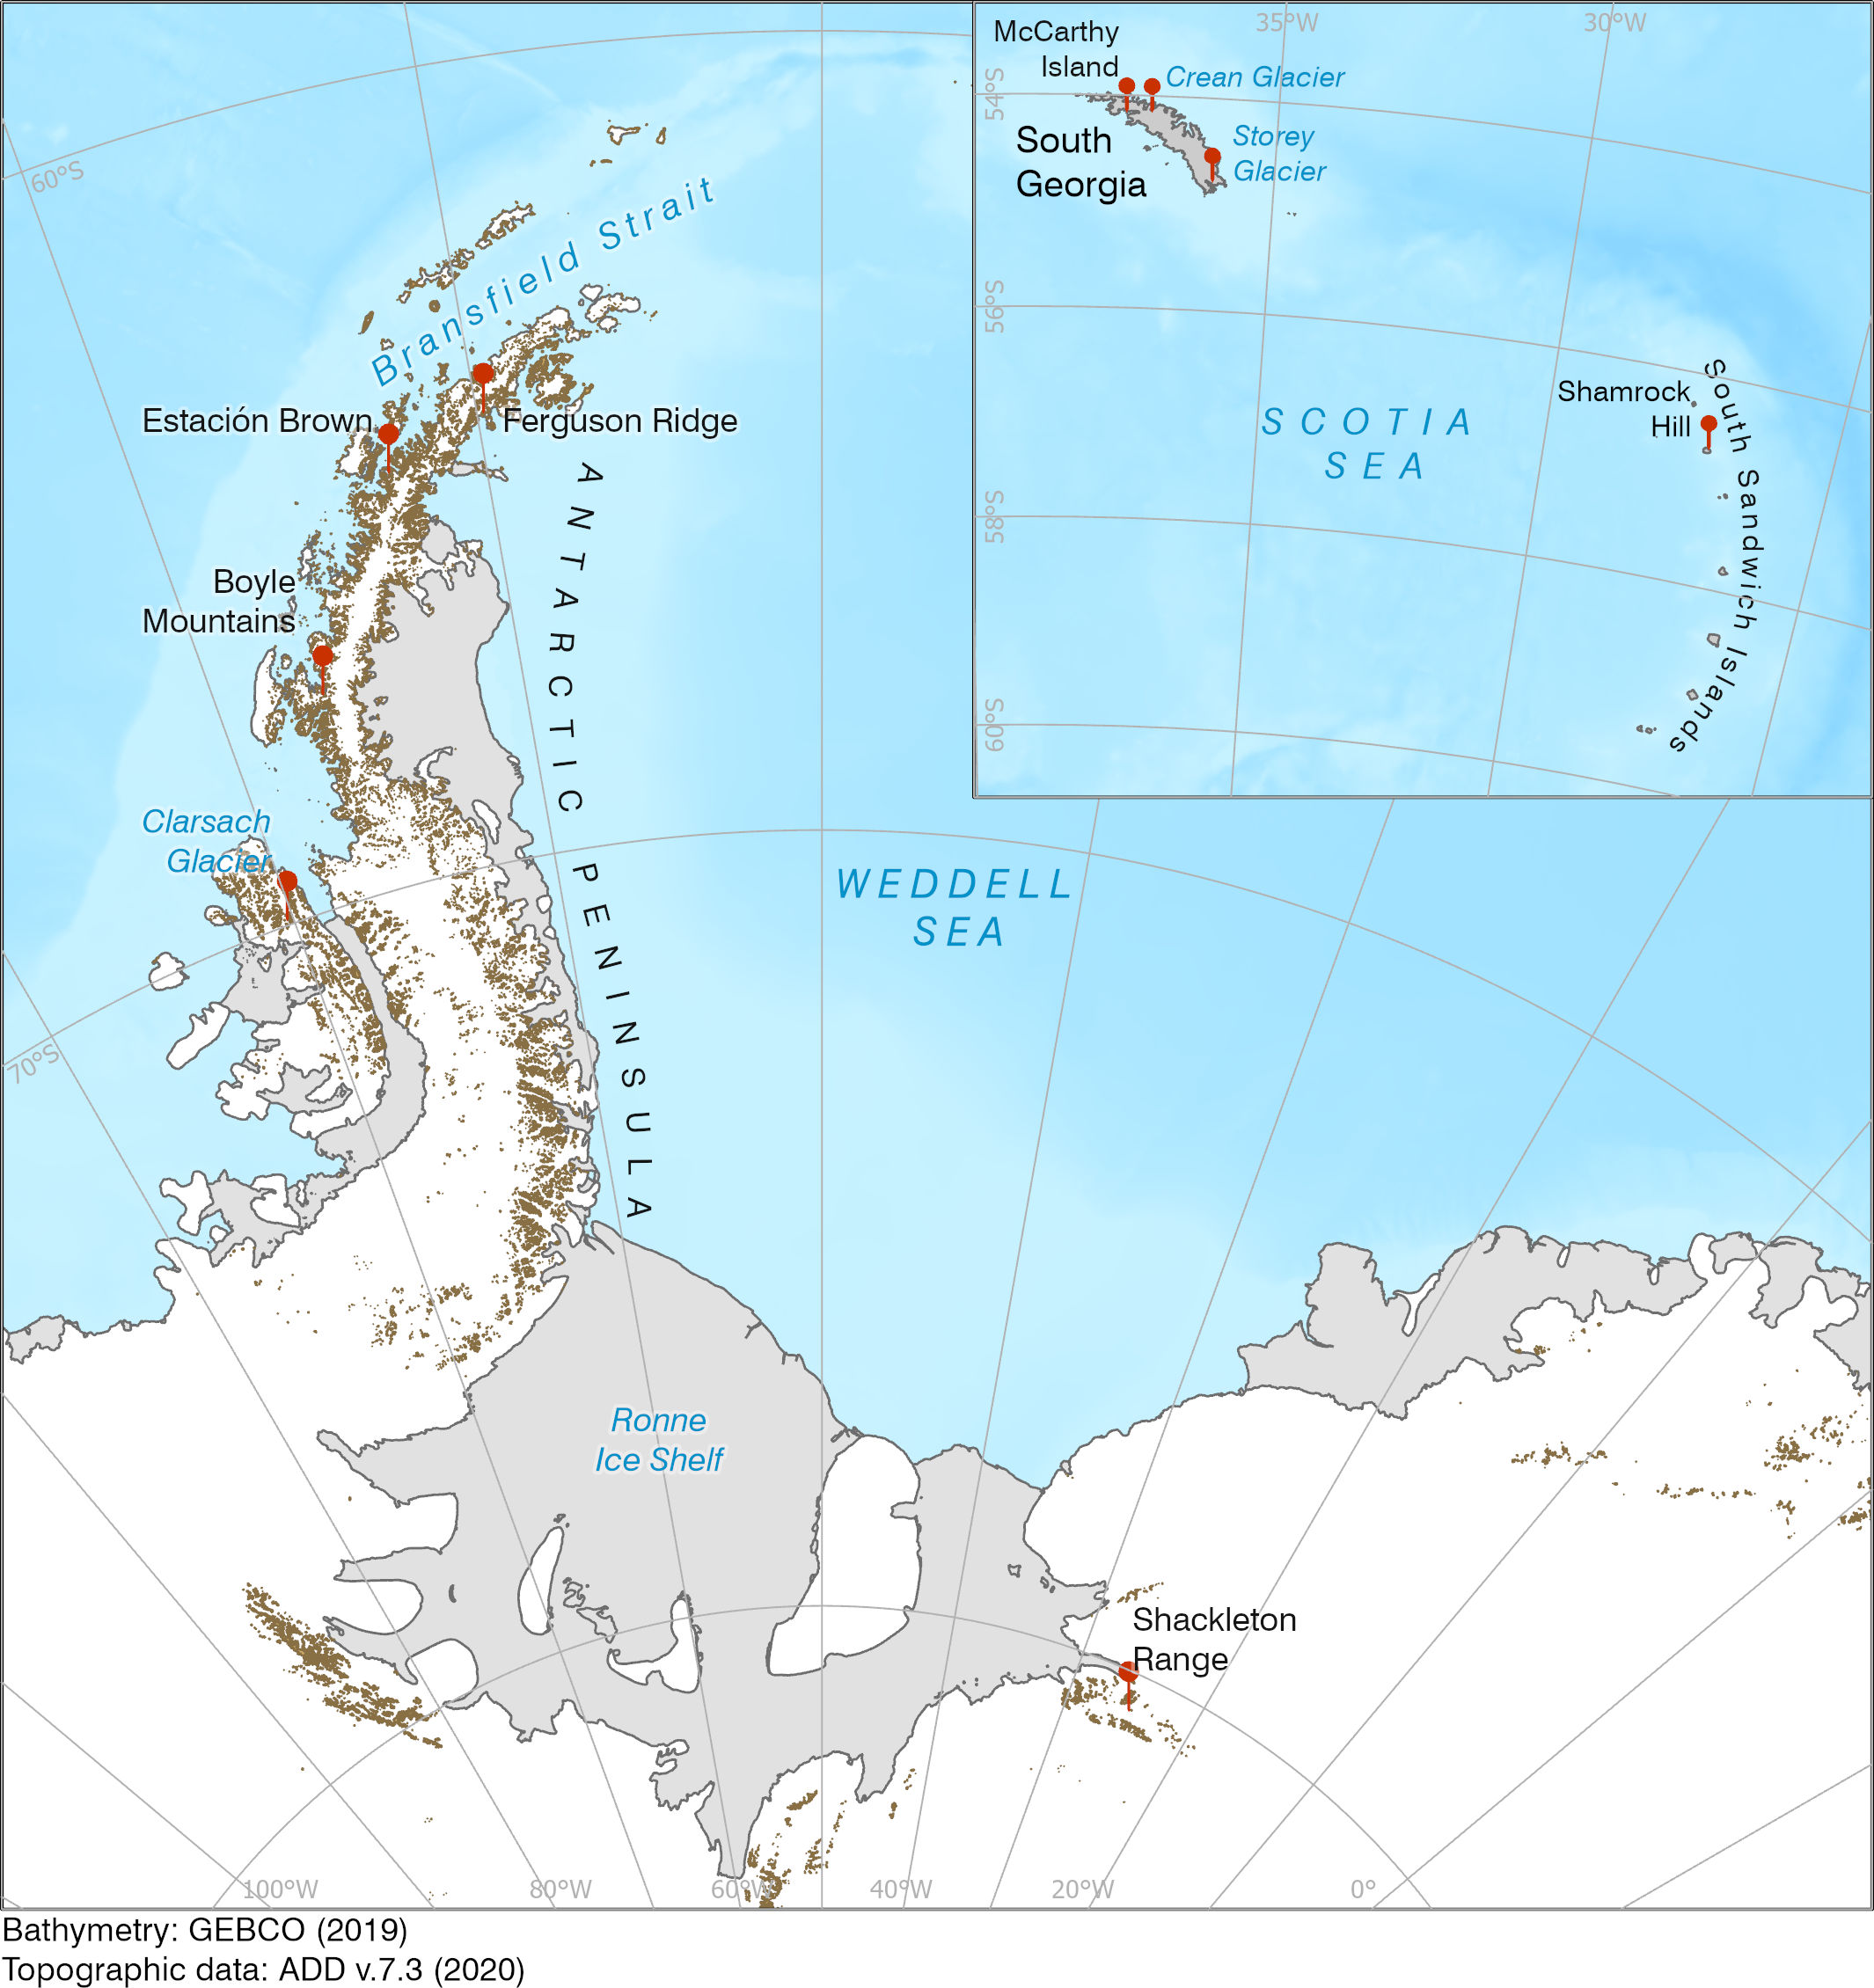 Map showing Antarctic place names from Ireland.